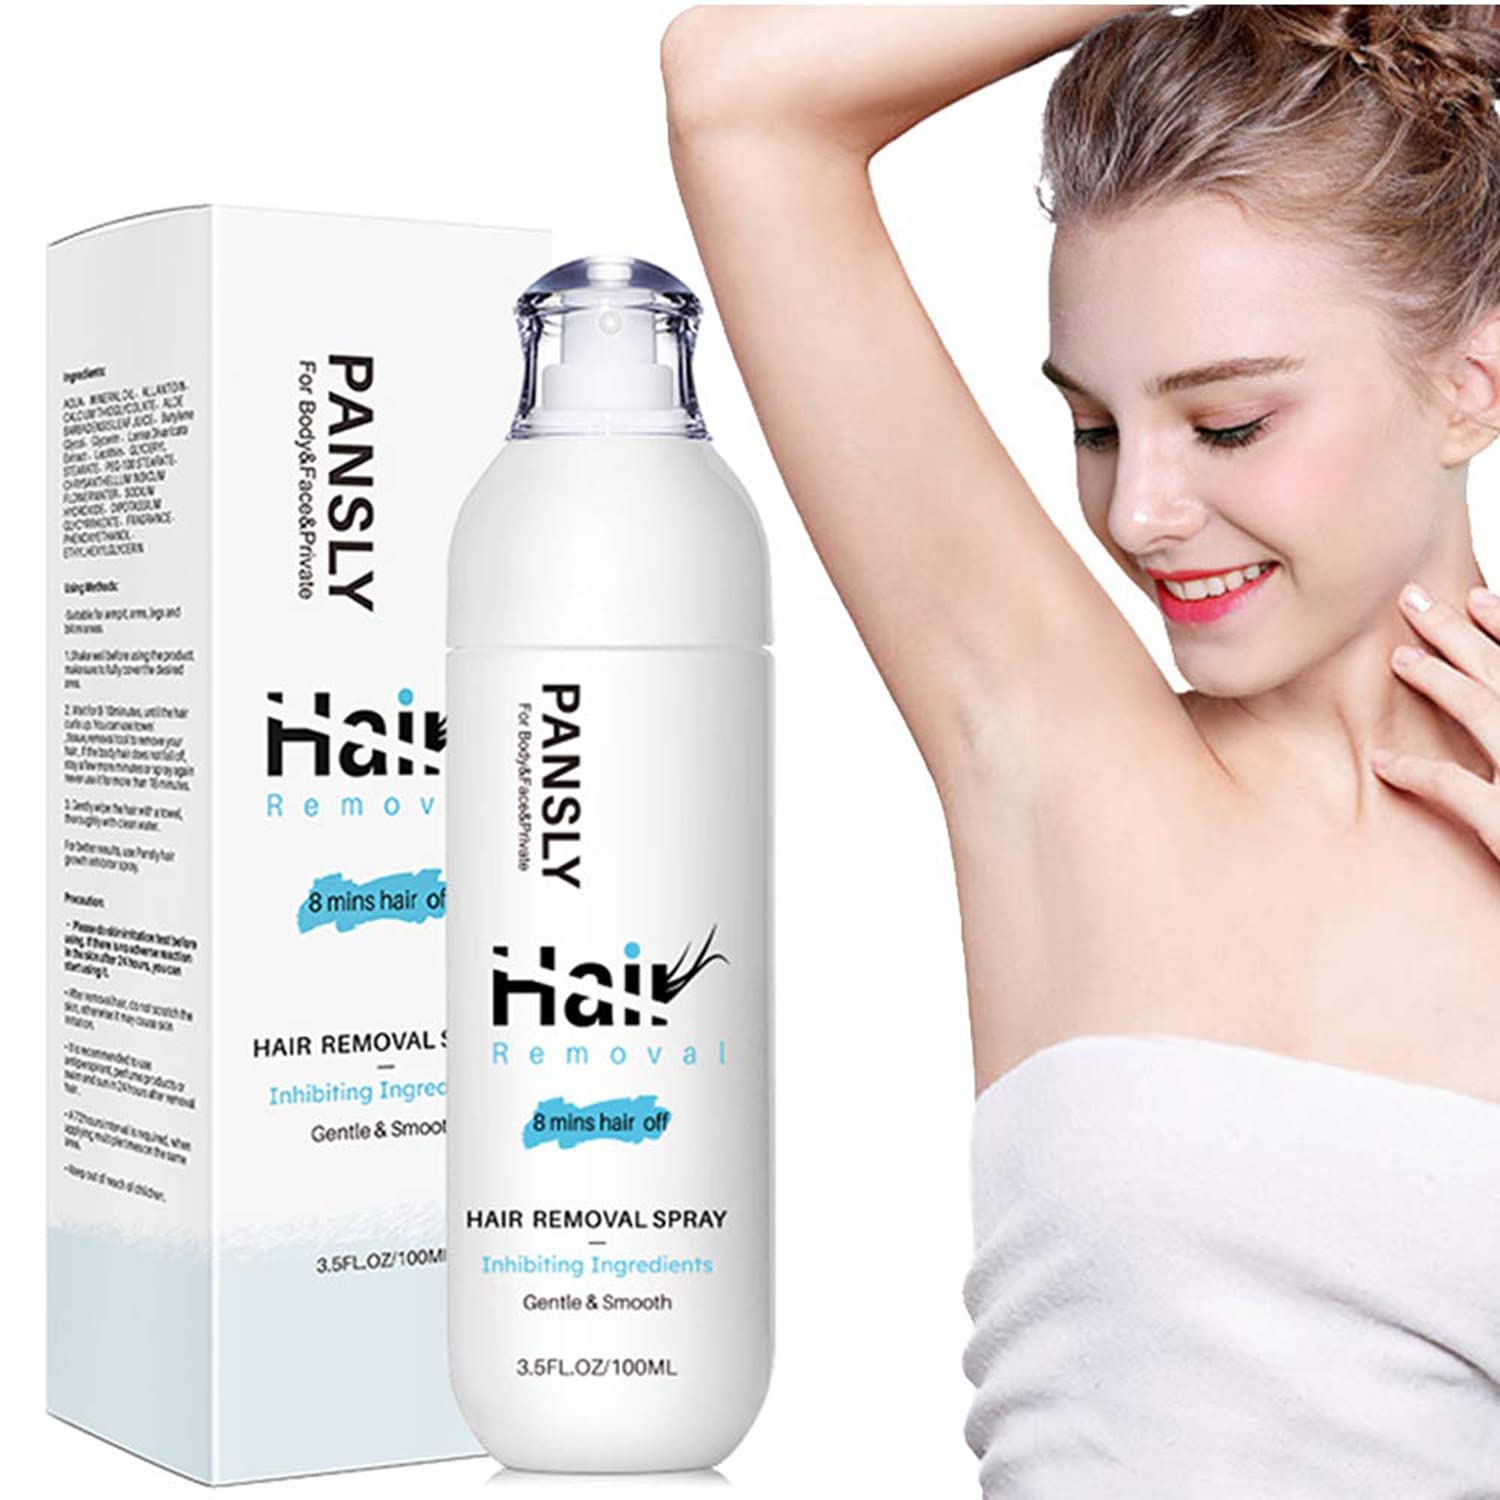 100ml Hair Removal Spray,Hair Removal Cream,Non-Irritating Moisturizing for  Men Women Legs Hands Arms Underarms and Bikini Areas Natural Stop Hair  Growth Inhibitor Spray